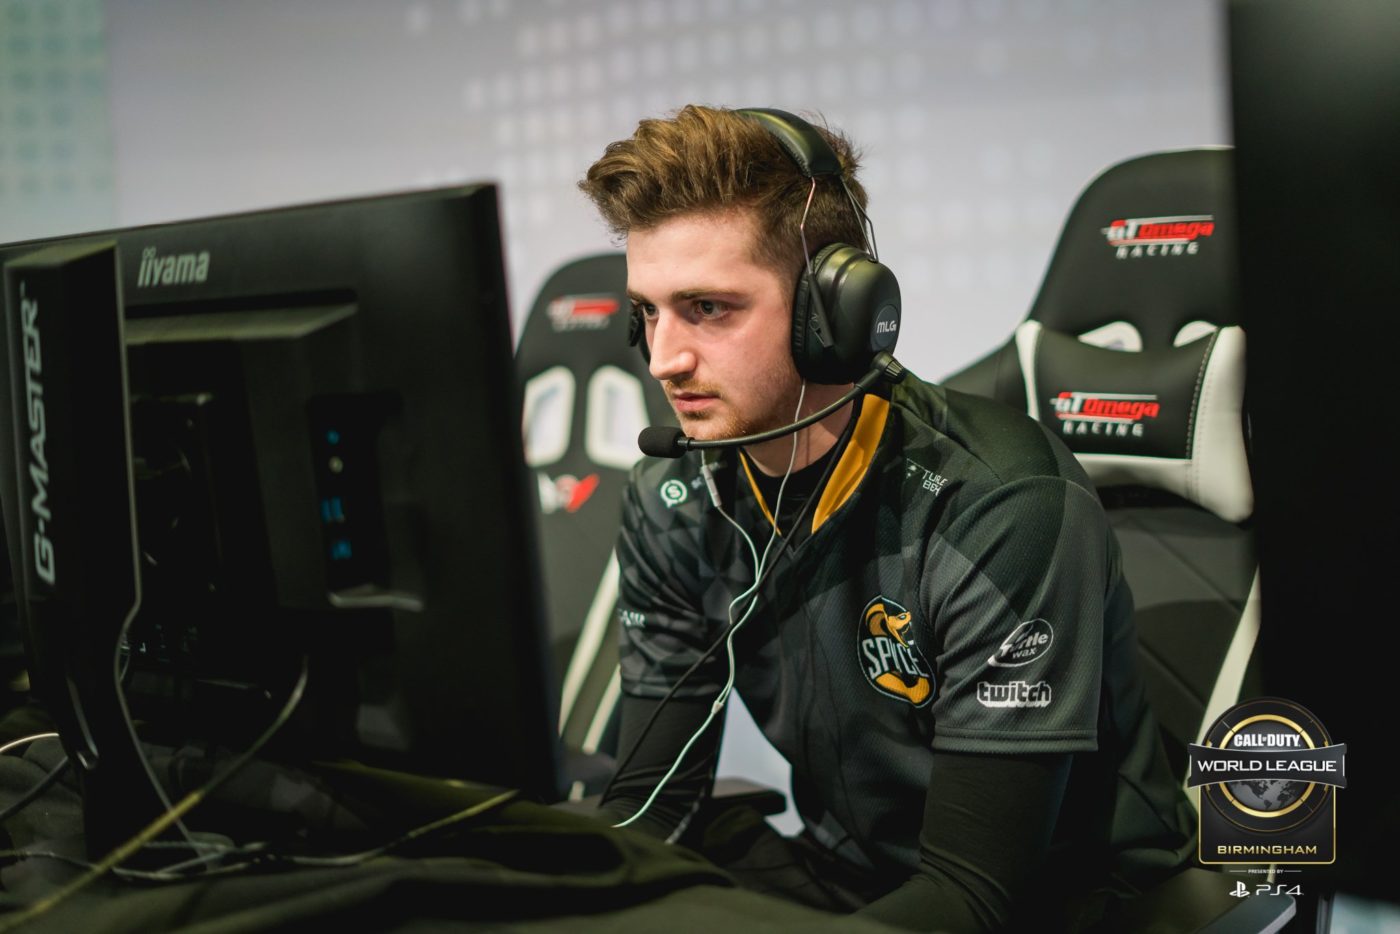 'There needs to be more region-based LAN events' – interview with Splyce's UK Call of Duty player Bance